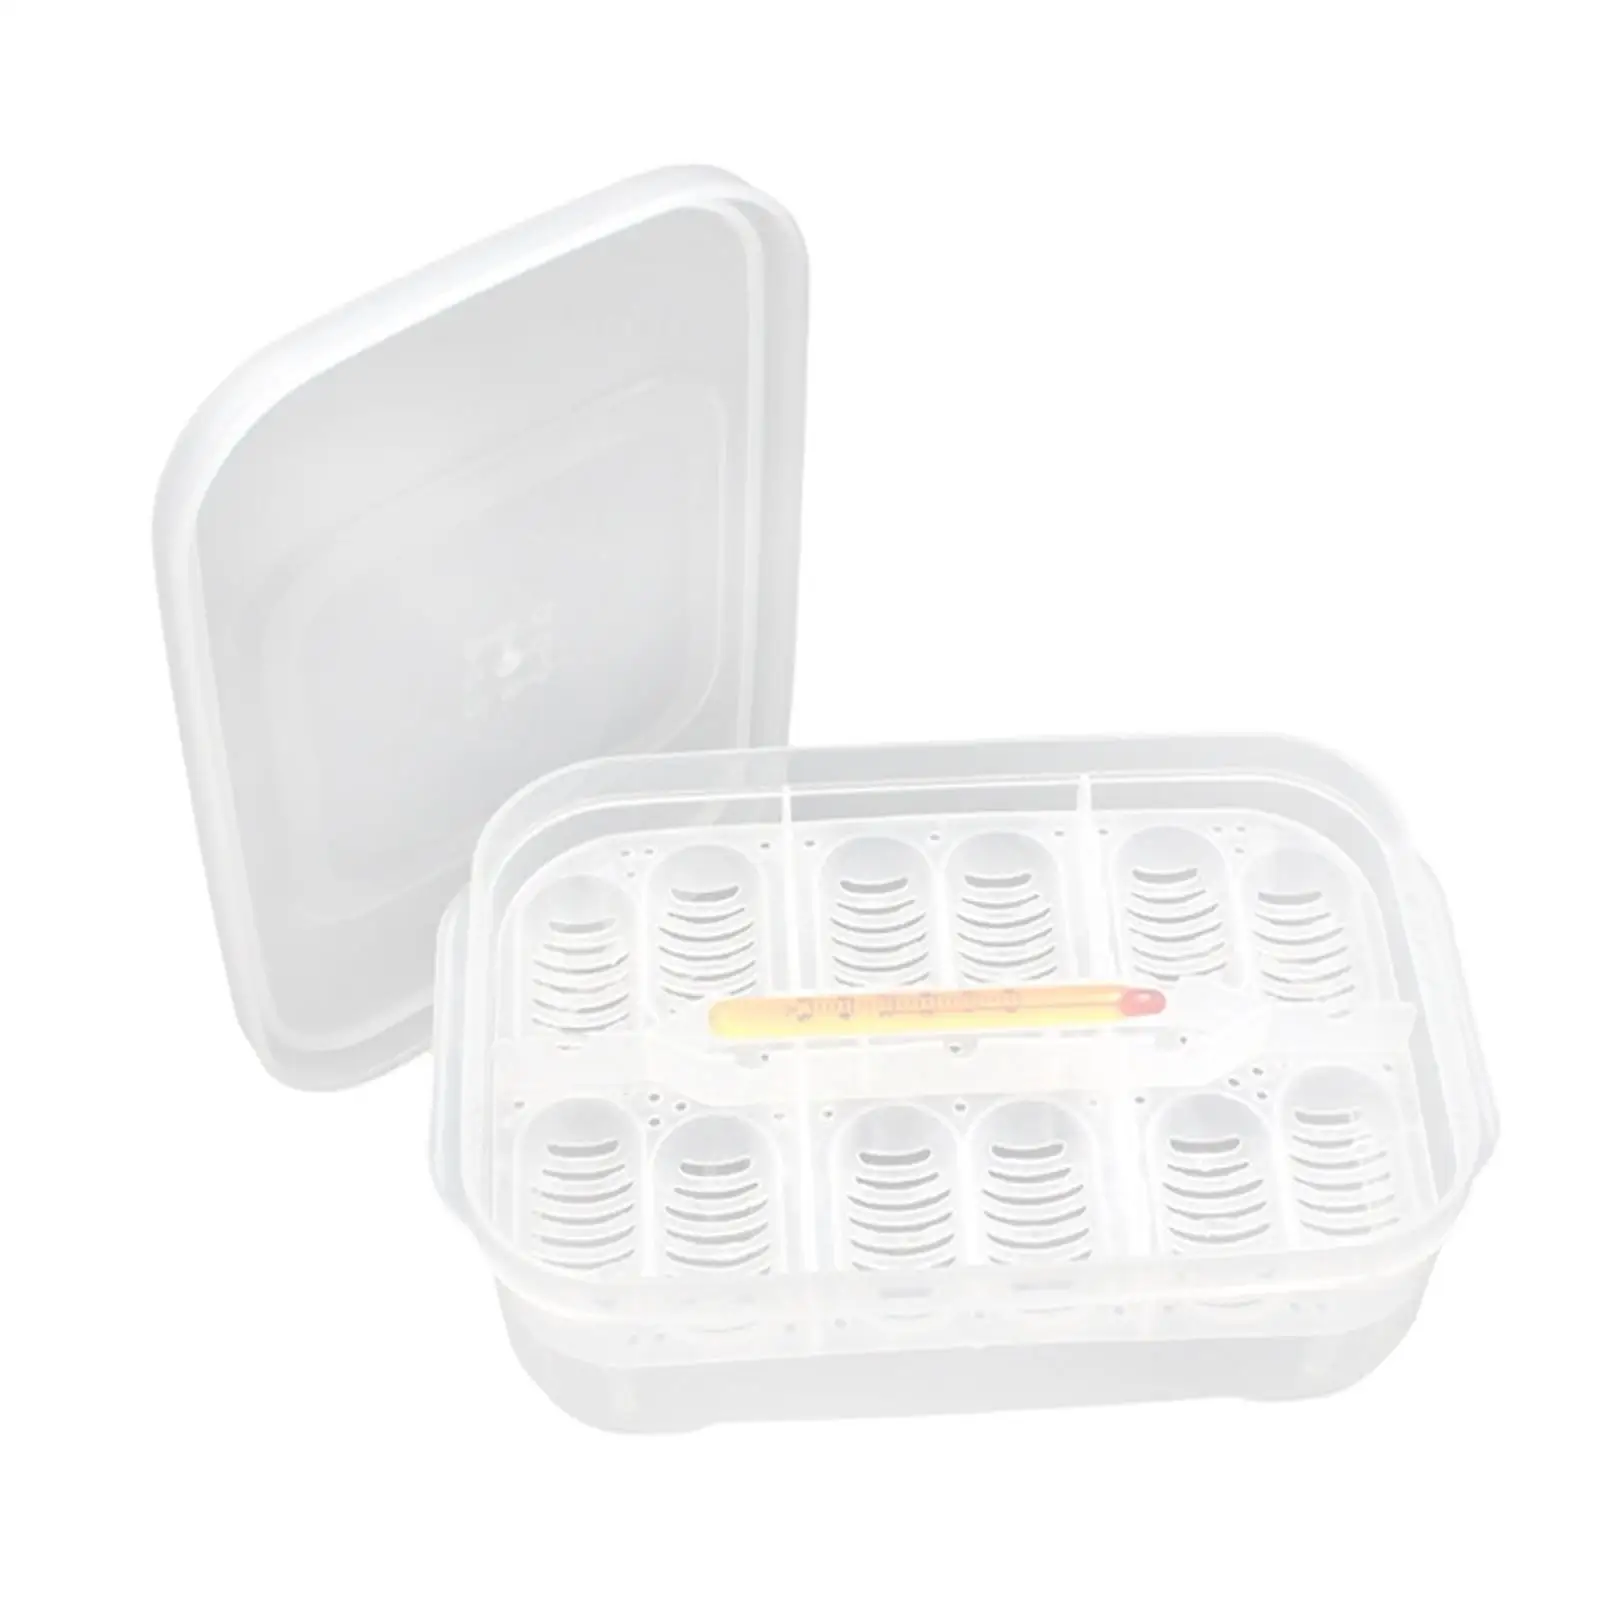 Plastic Reptile Egg Tray Incubator 12 Grids Thermometer with Eggs Tray Tool Container for Hatching Breeding Supplies Gecko Snake